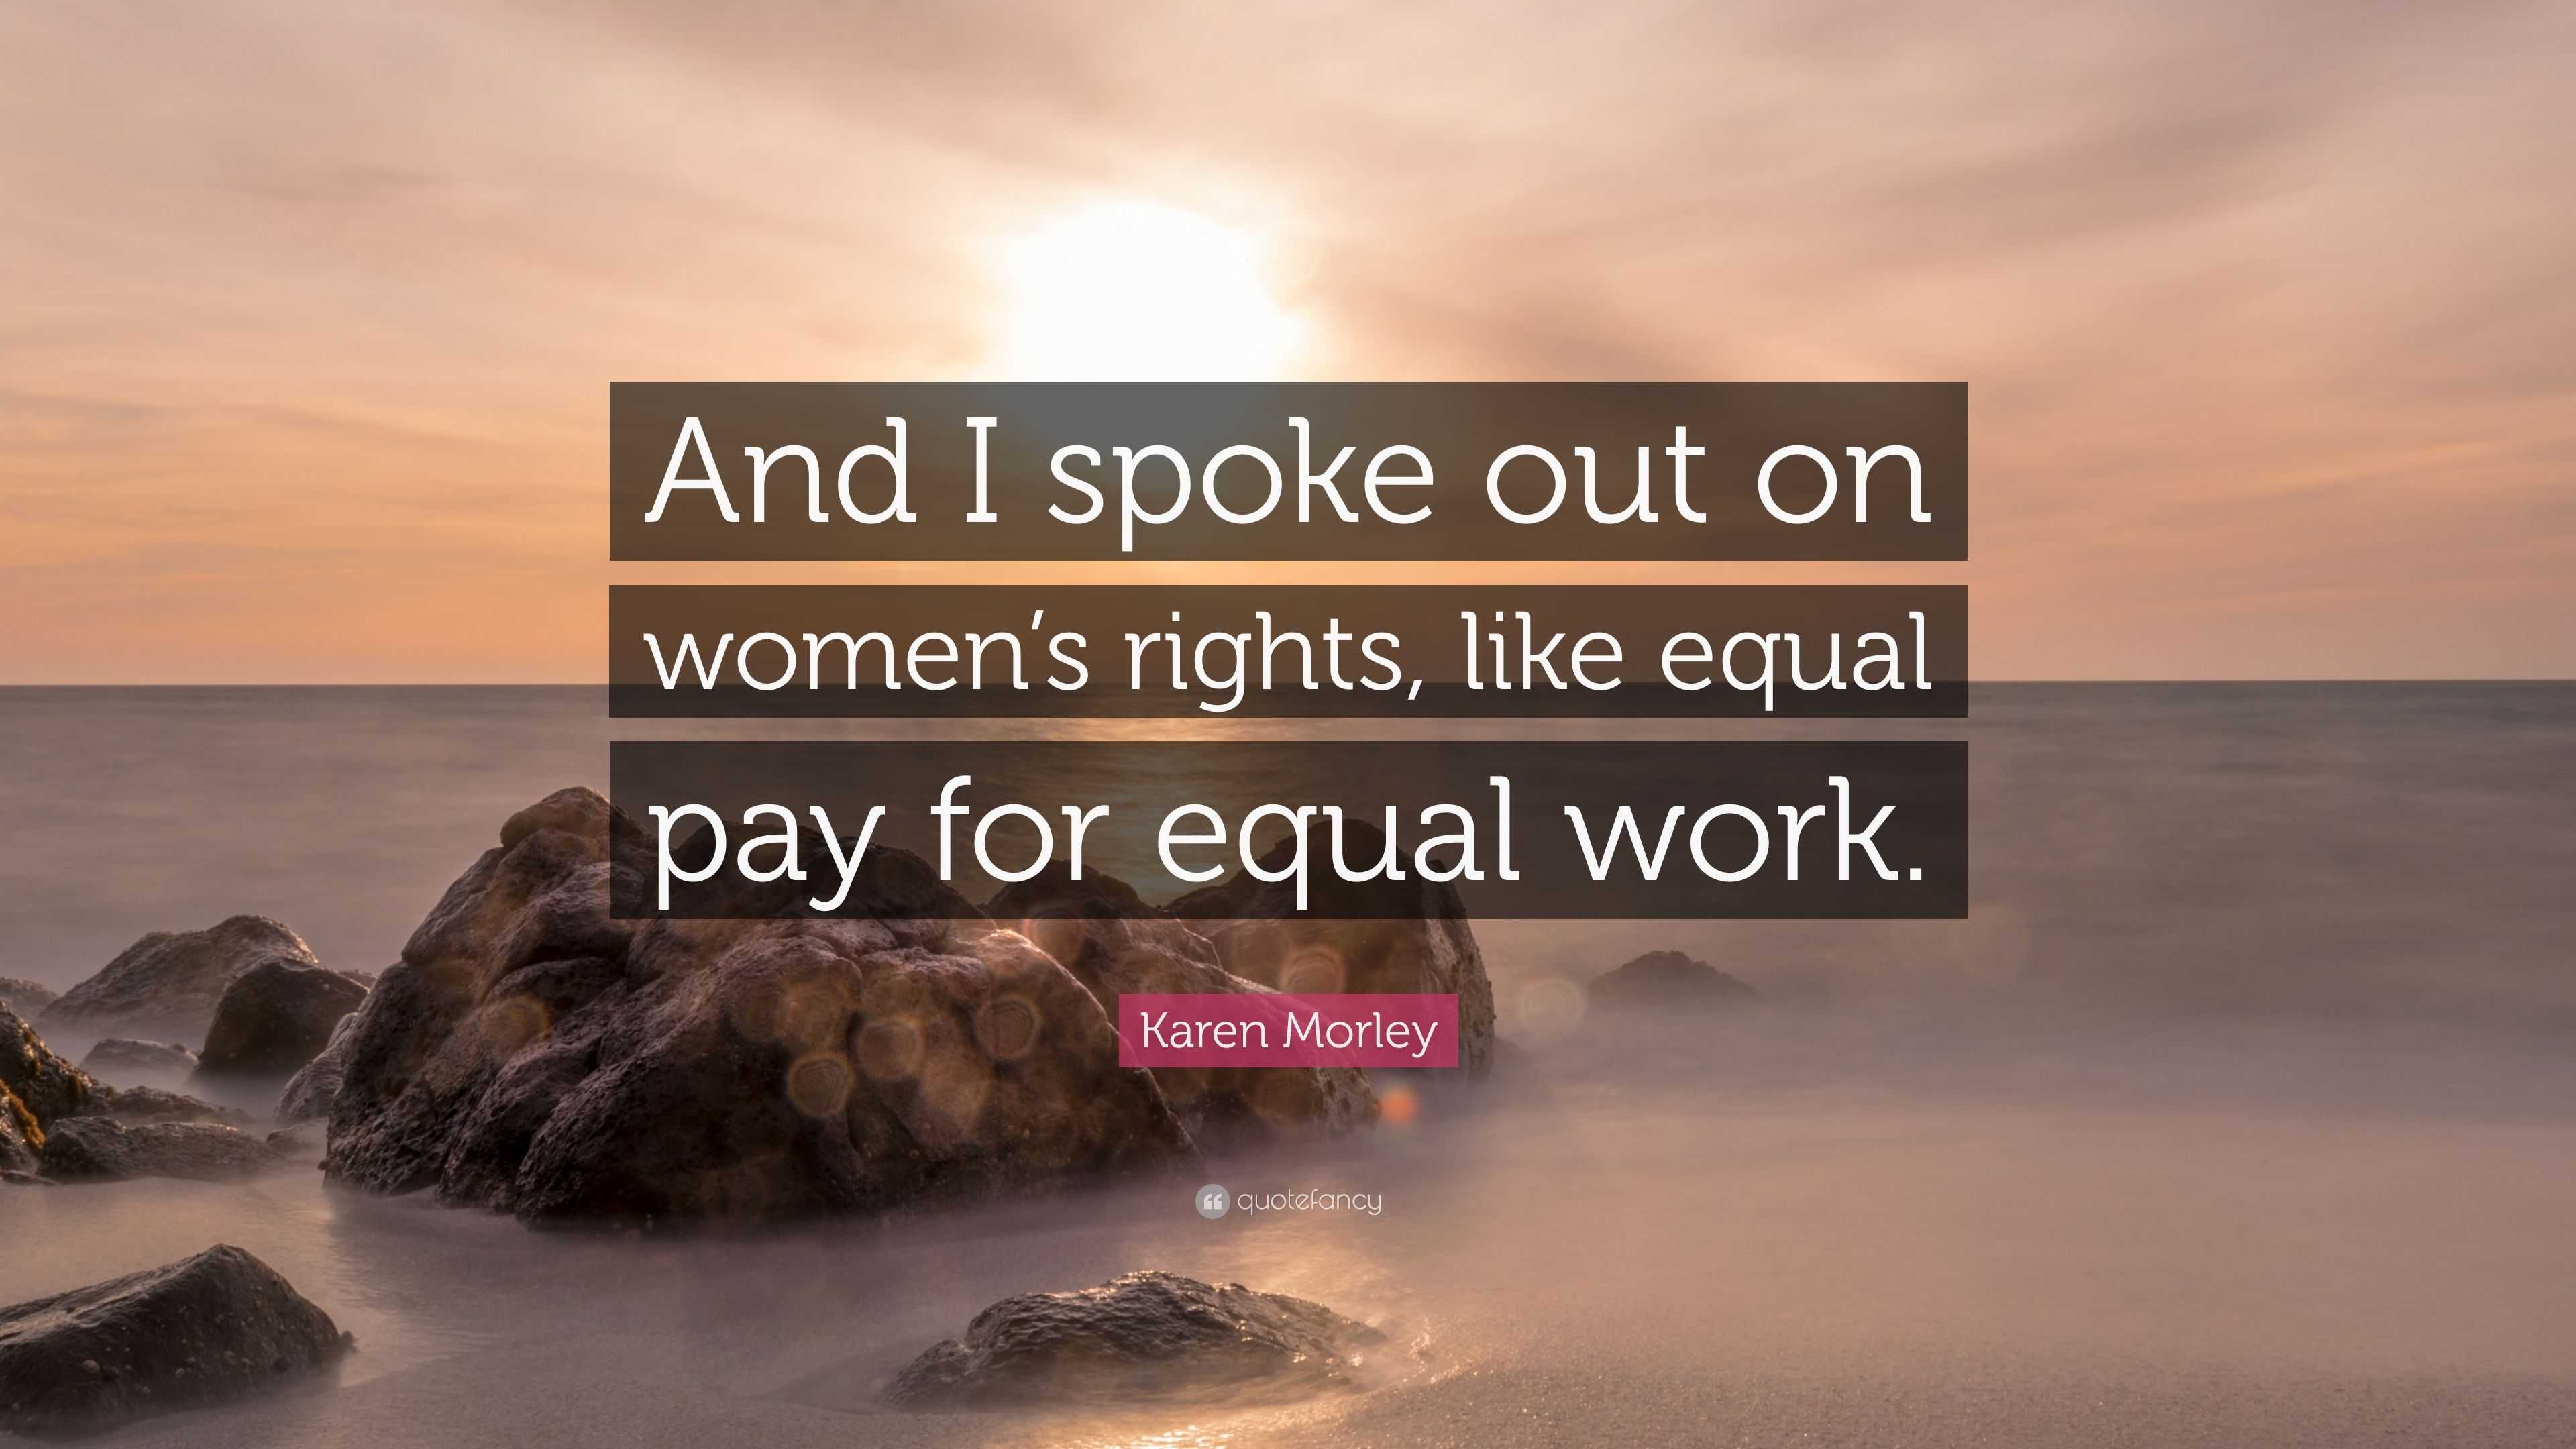 equal pay for equal work act colorado